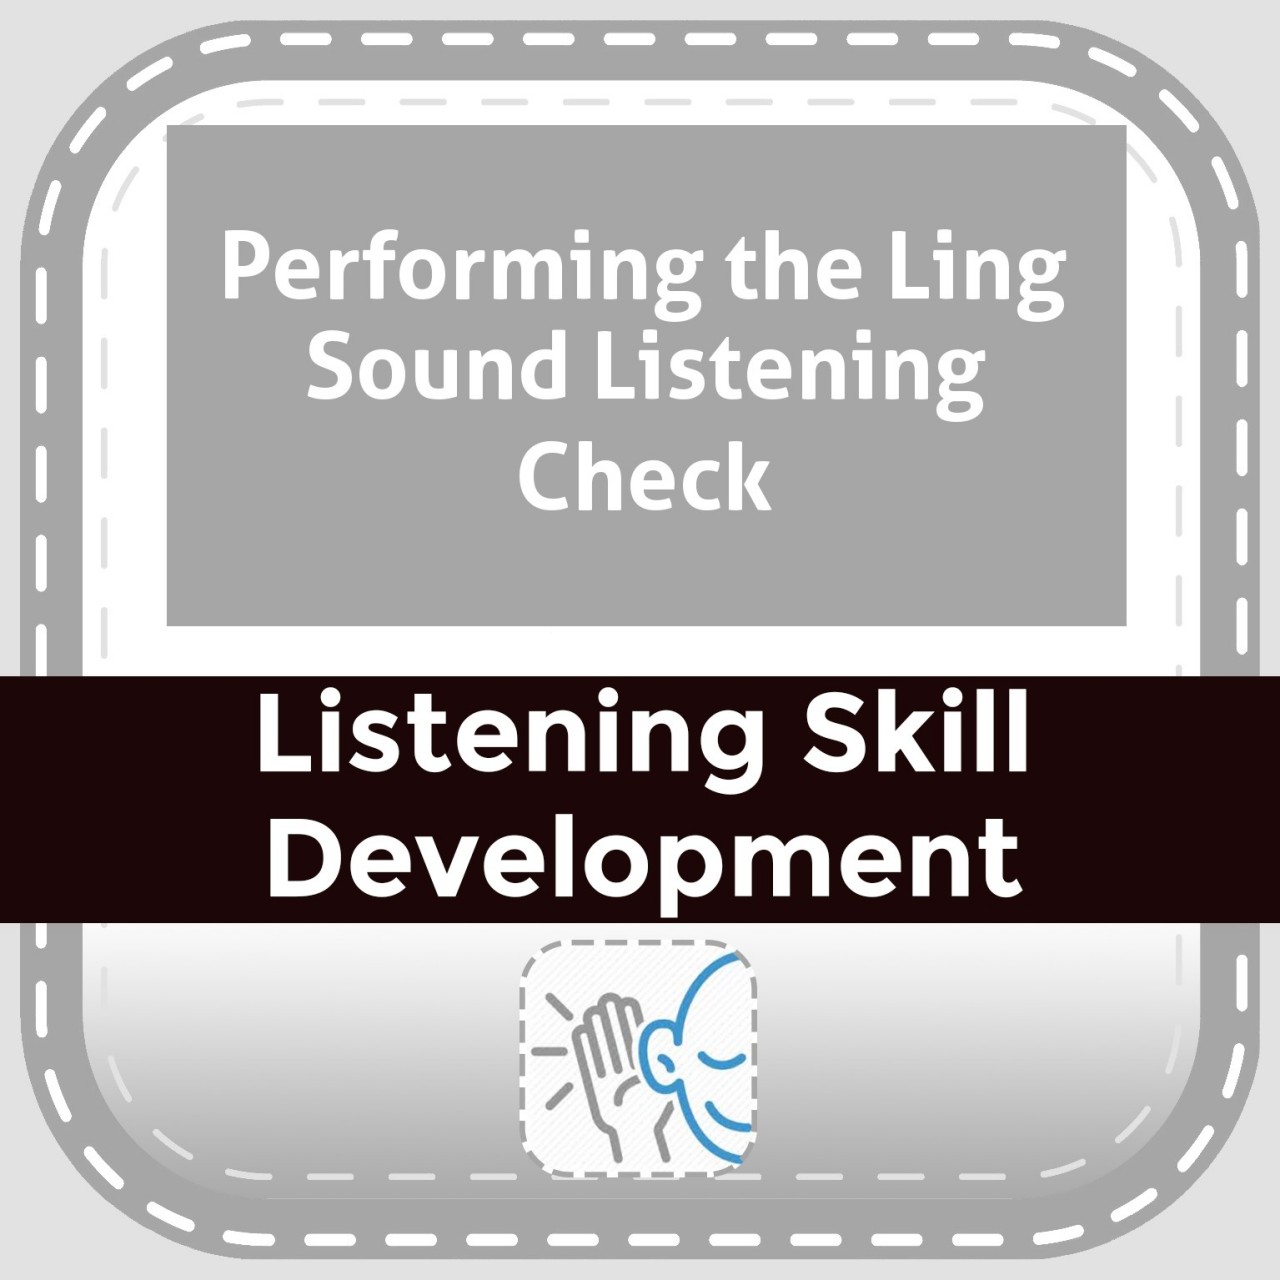 Performing the Ling Sound Listening Check